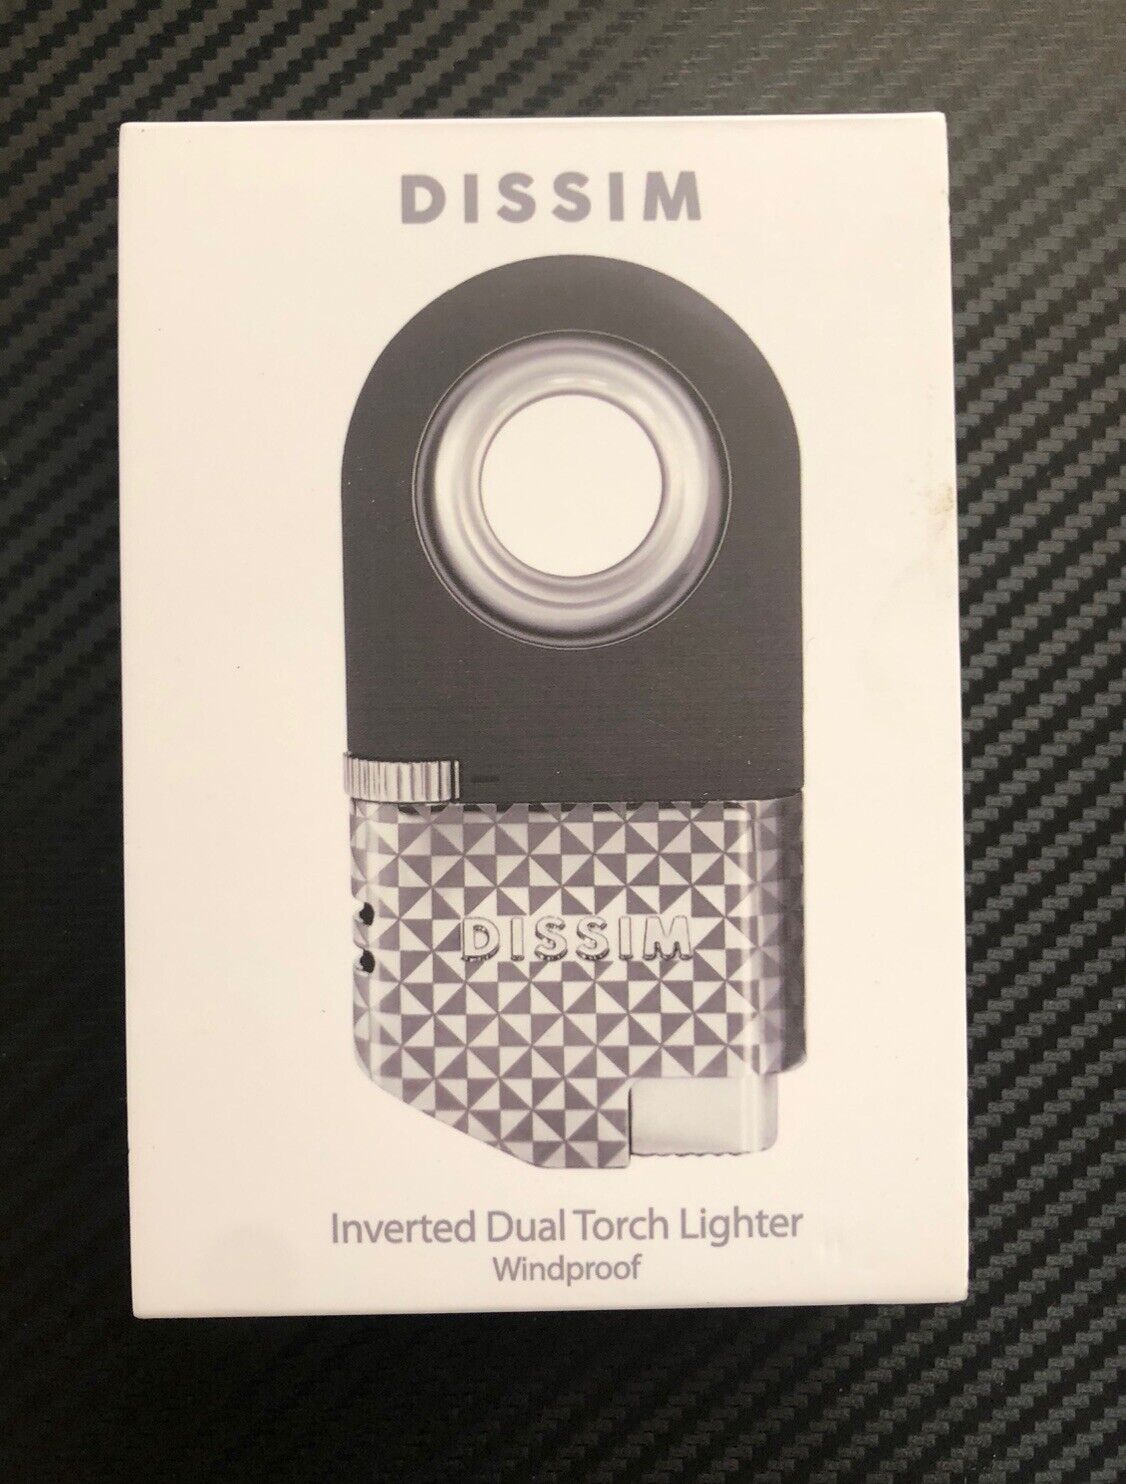 Dissim Inverted Dual Torch Lighter - Pinwheel Silver Obuy Exclusive NEW